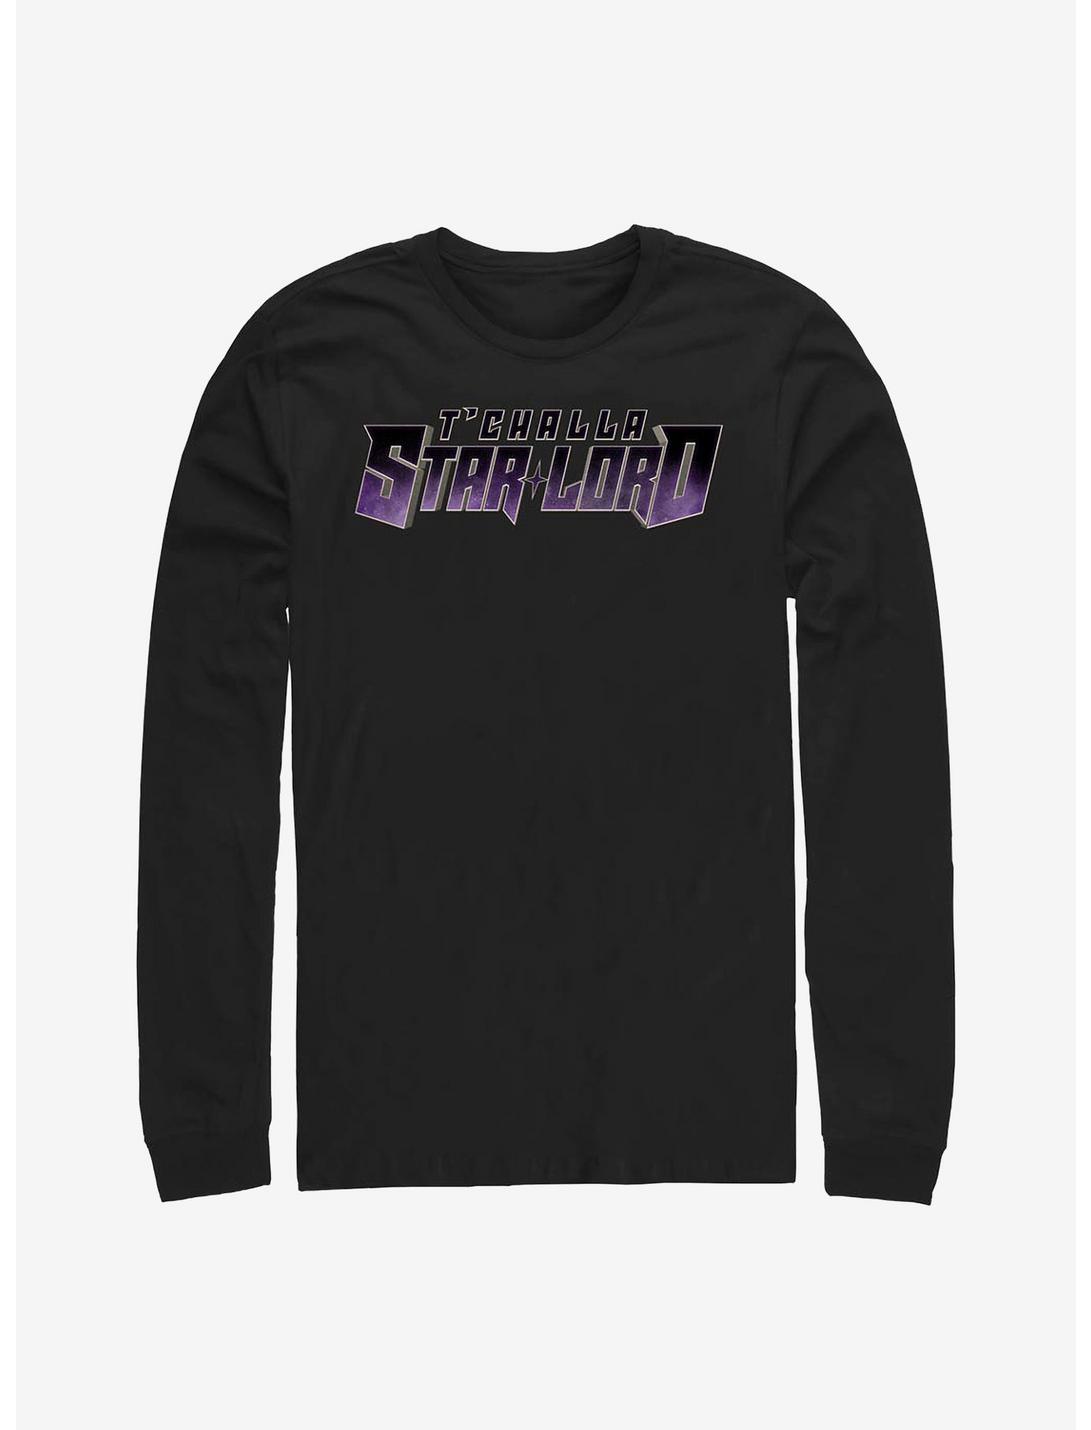 Marvel What If...? T'Challa Was Star-Lord Long-Sleeve T-Shirt, BLACK, hi-res